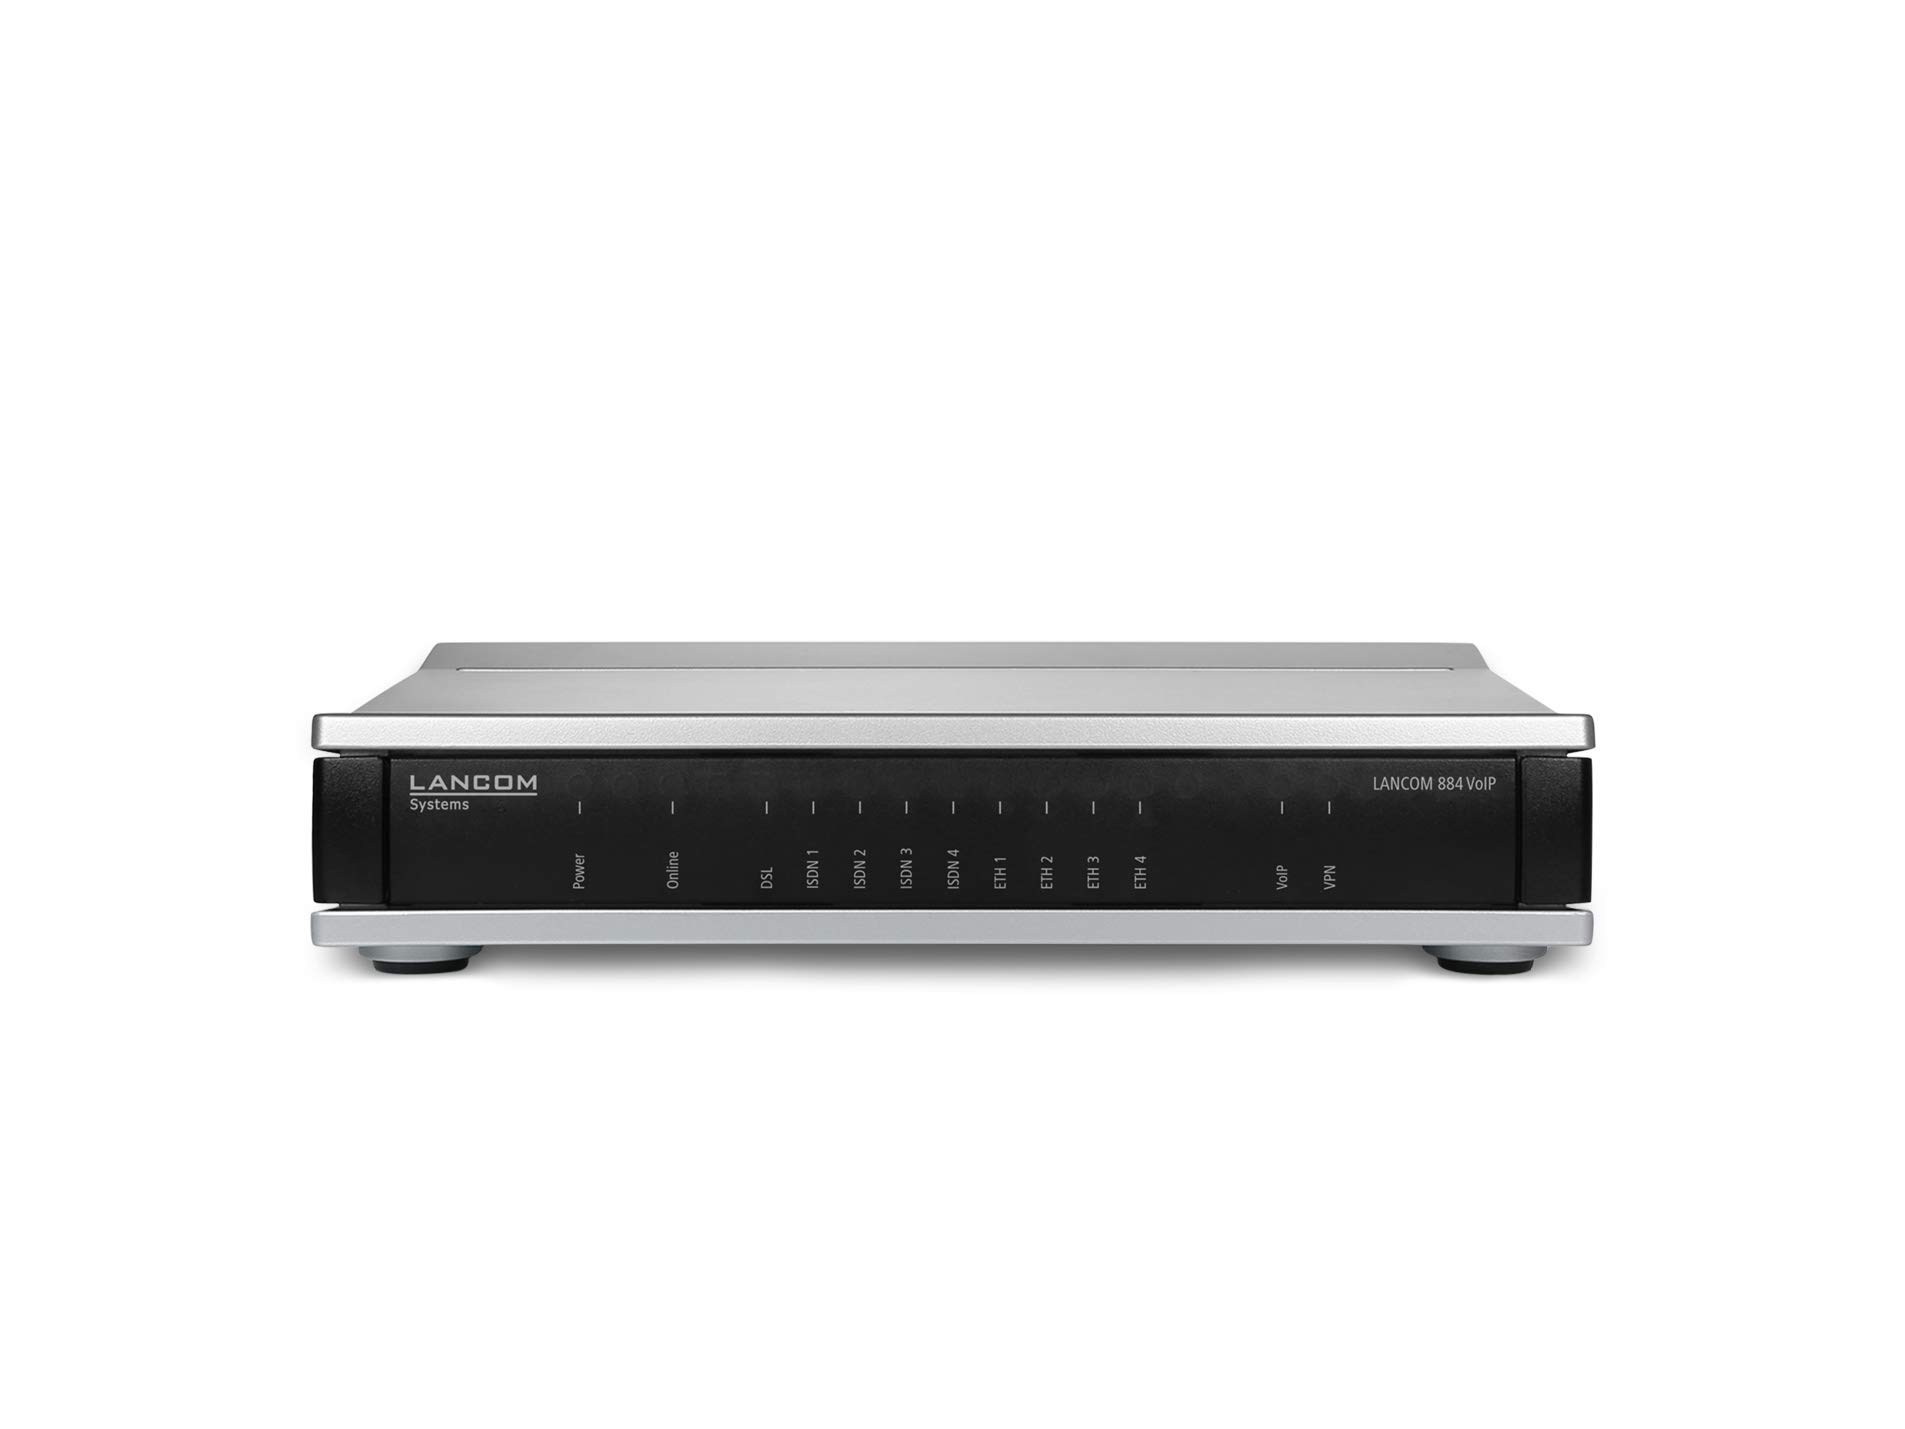 LANCOM 62082 884 VoIP (EU, over ISDN), Single Site Business-VoIP-Router, VDSL2/ADSL2+-Modem, ISDN-VoIP-Wandlung, 4xISDN (2xNT & 2xTE/NT) 4xGE (IEEE 802.3az)